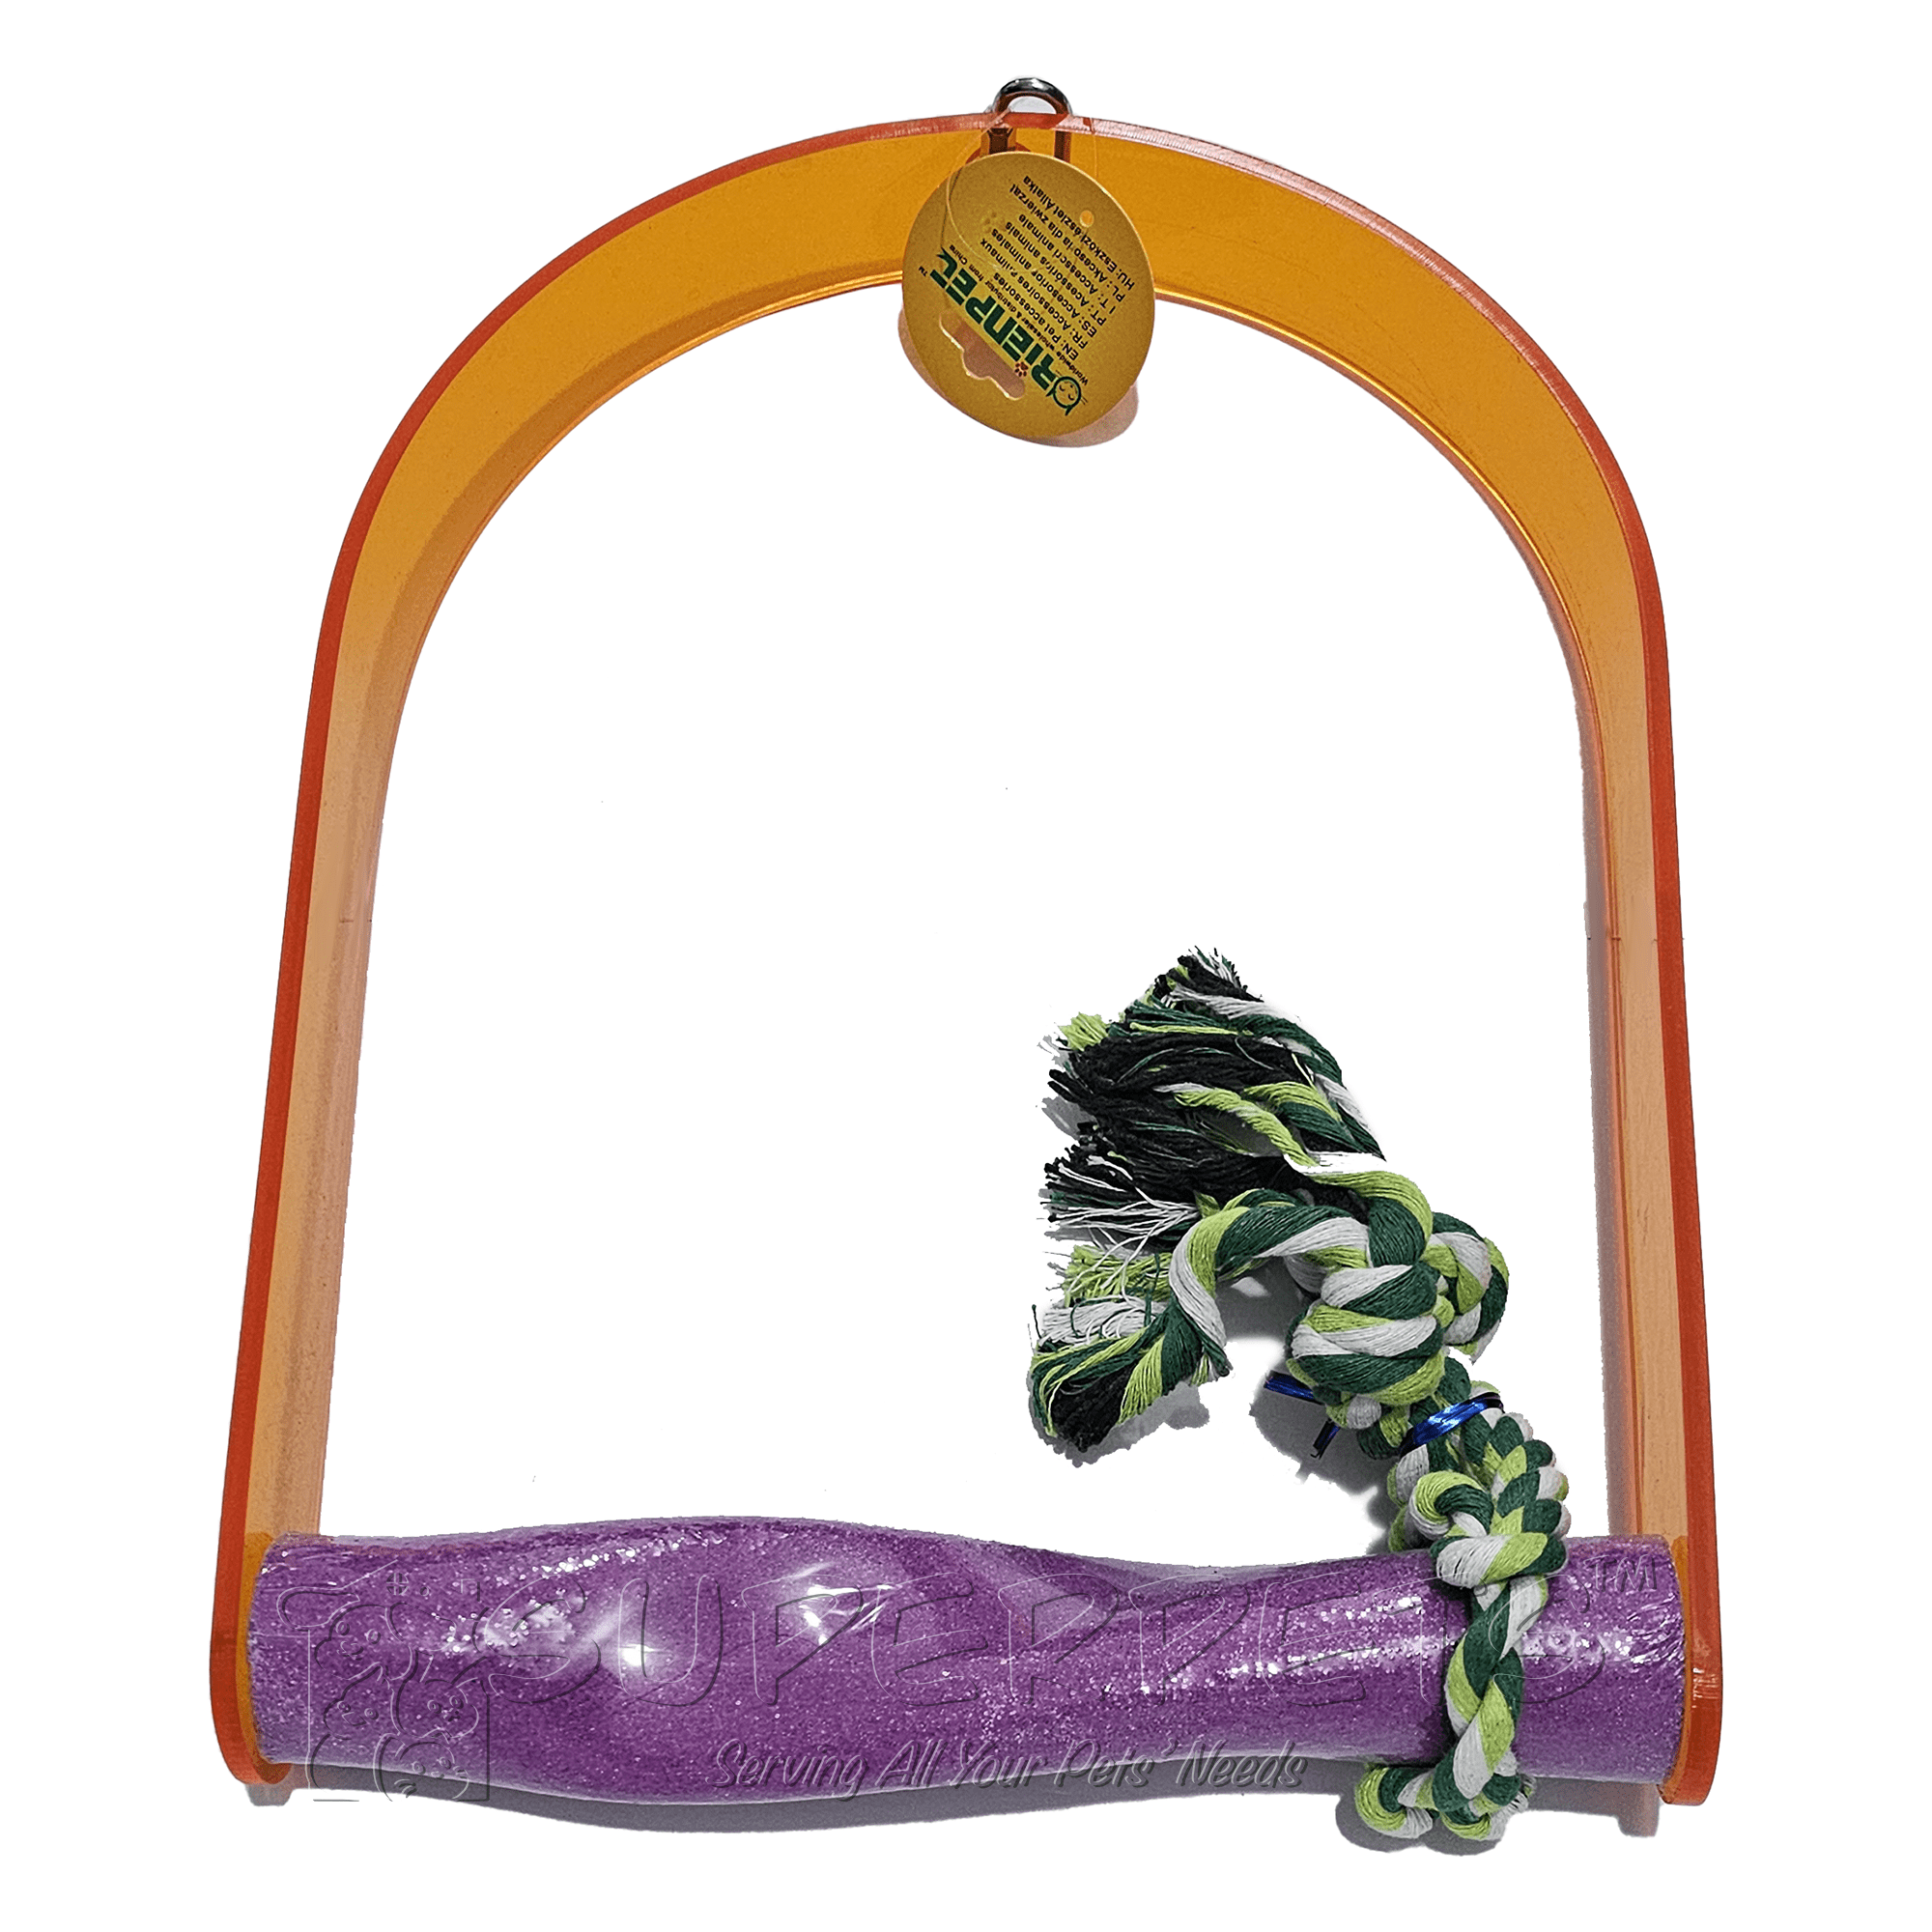 OPSP 7907 - Acrylic swing with Sand perch 41x26x4.7cm